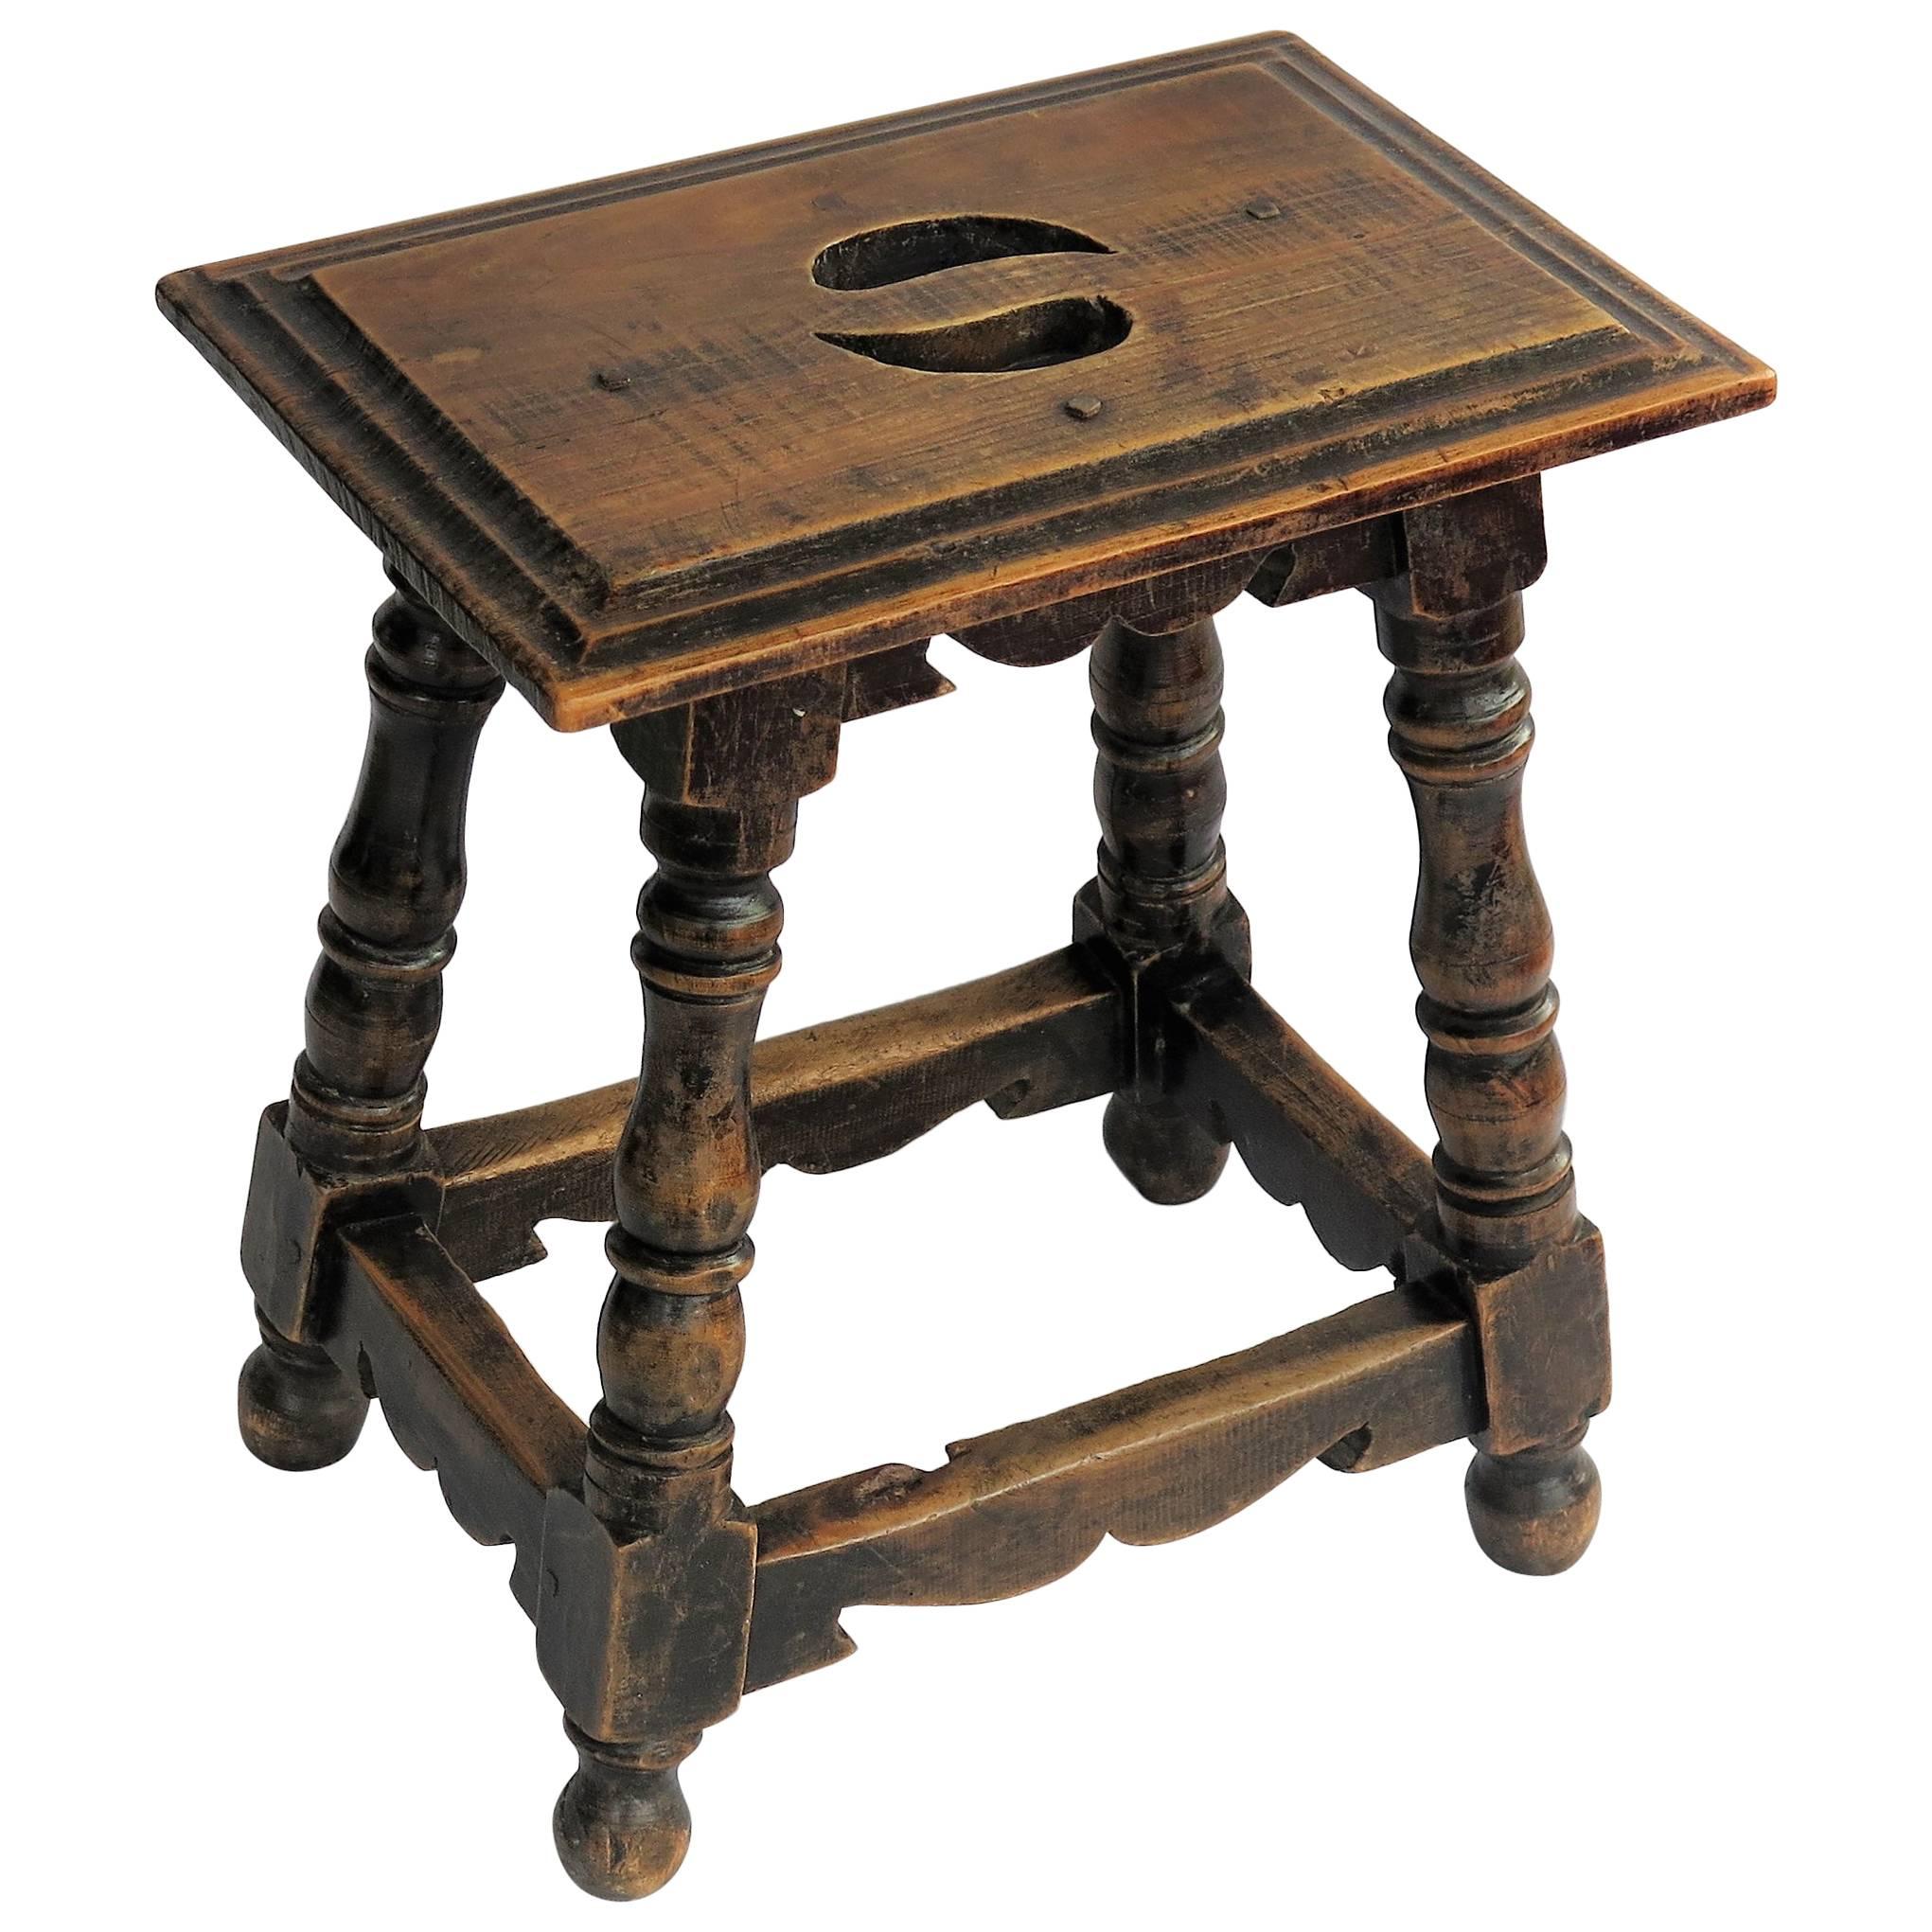 This is a very good, well-made country stool from the early part of the 19th century which we attribute to a French country maker.

The stool has a chamfered rectangular top which is pegged to the base and has two hand cut-outs to the top. It has